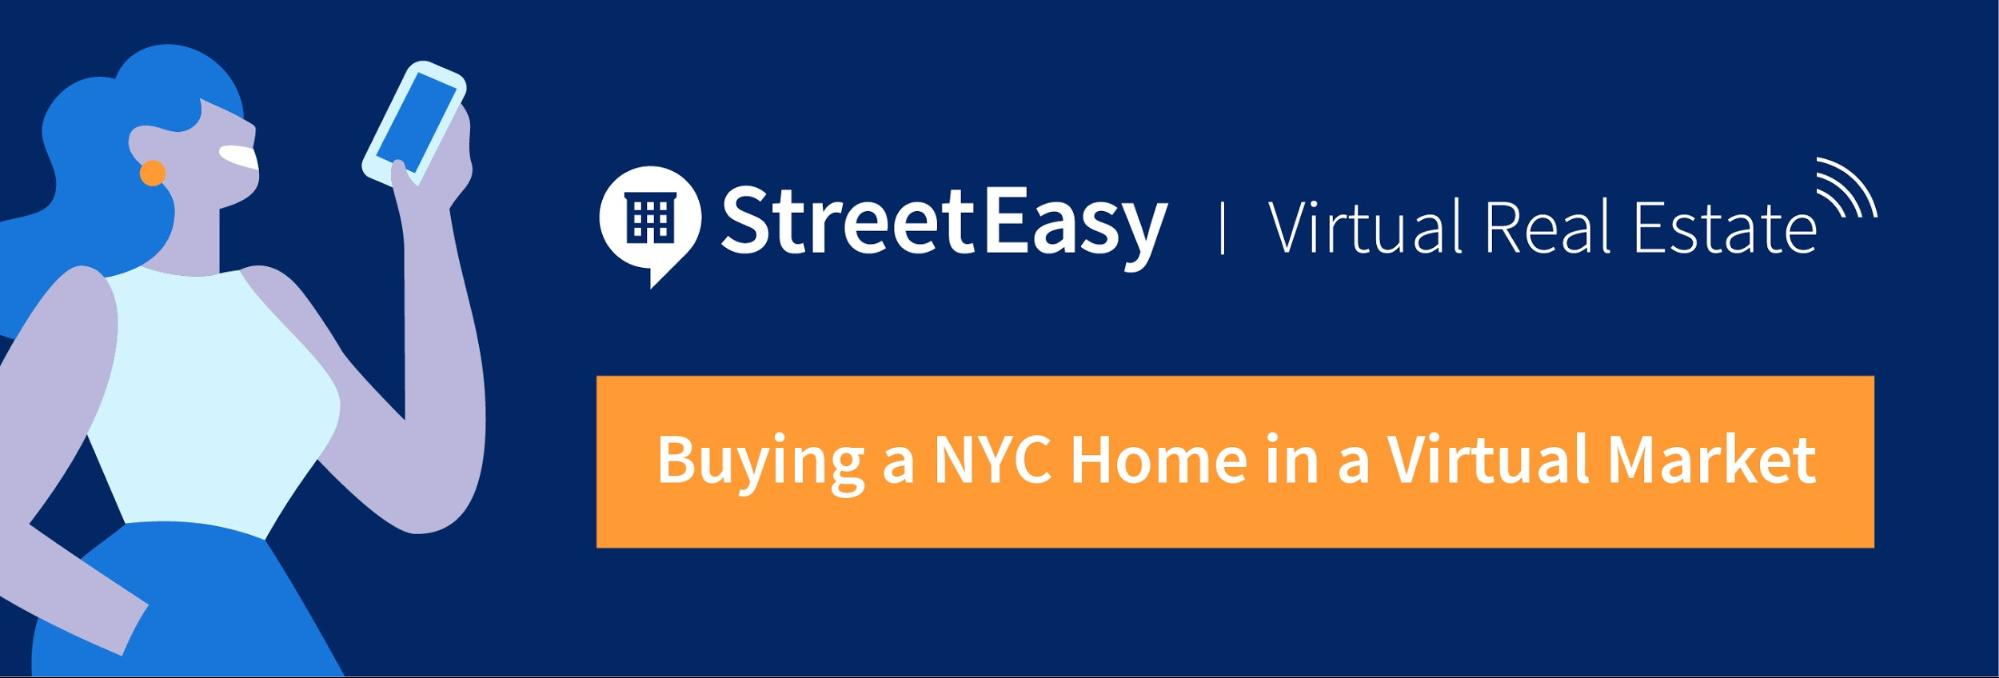 image of buying a NYC home in a virtual market recap